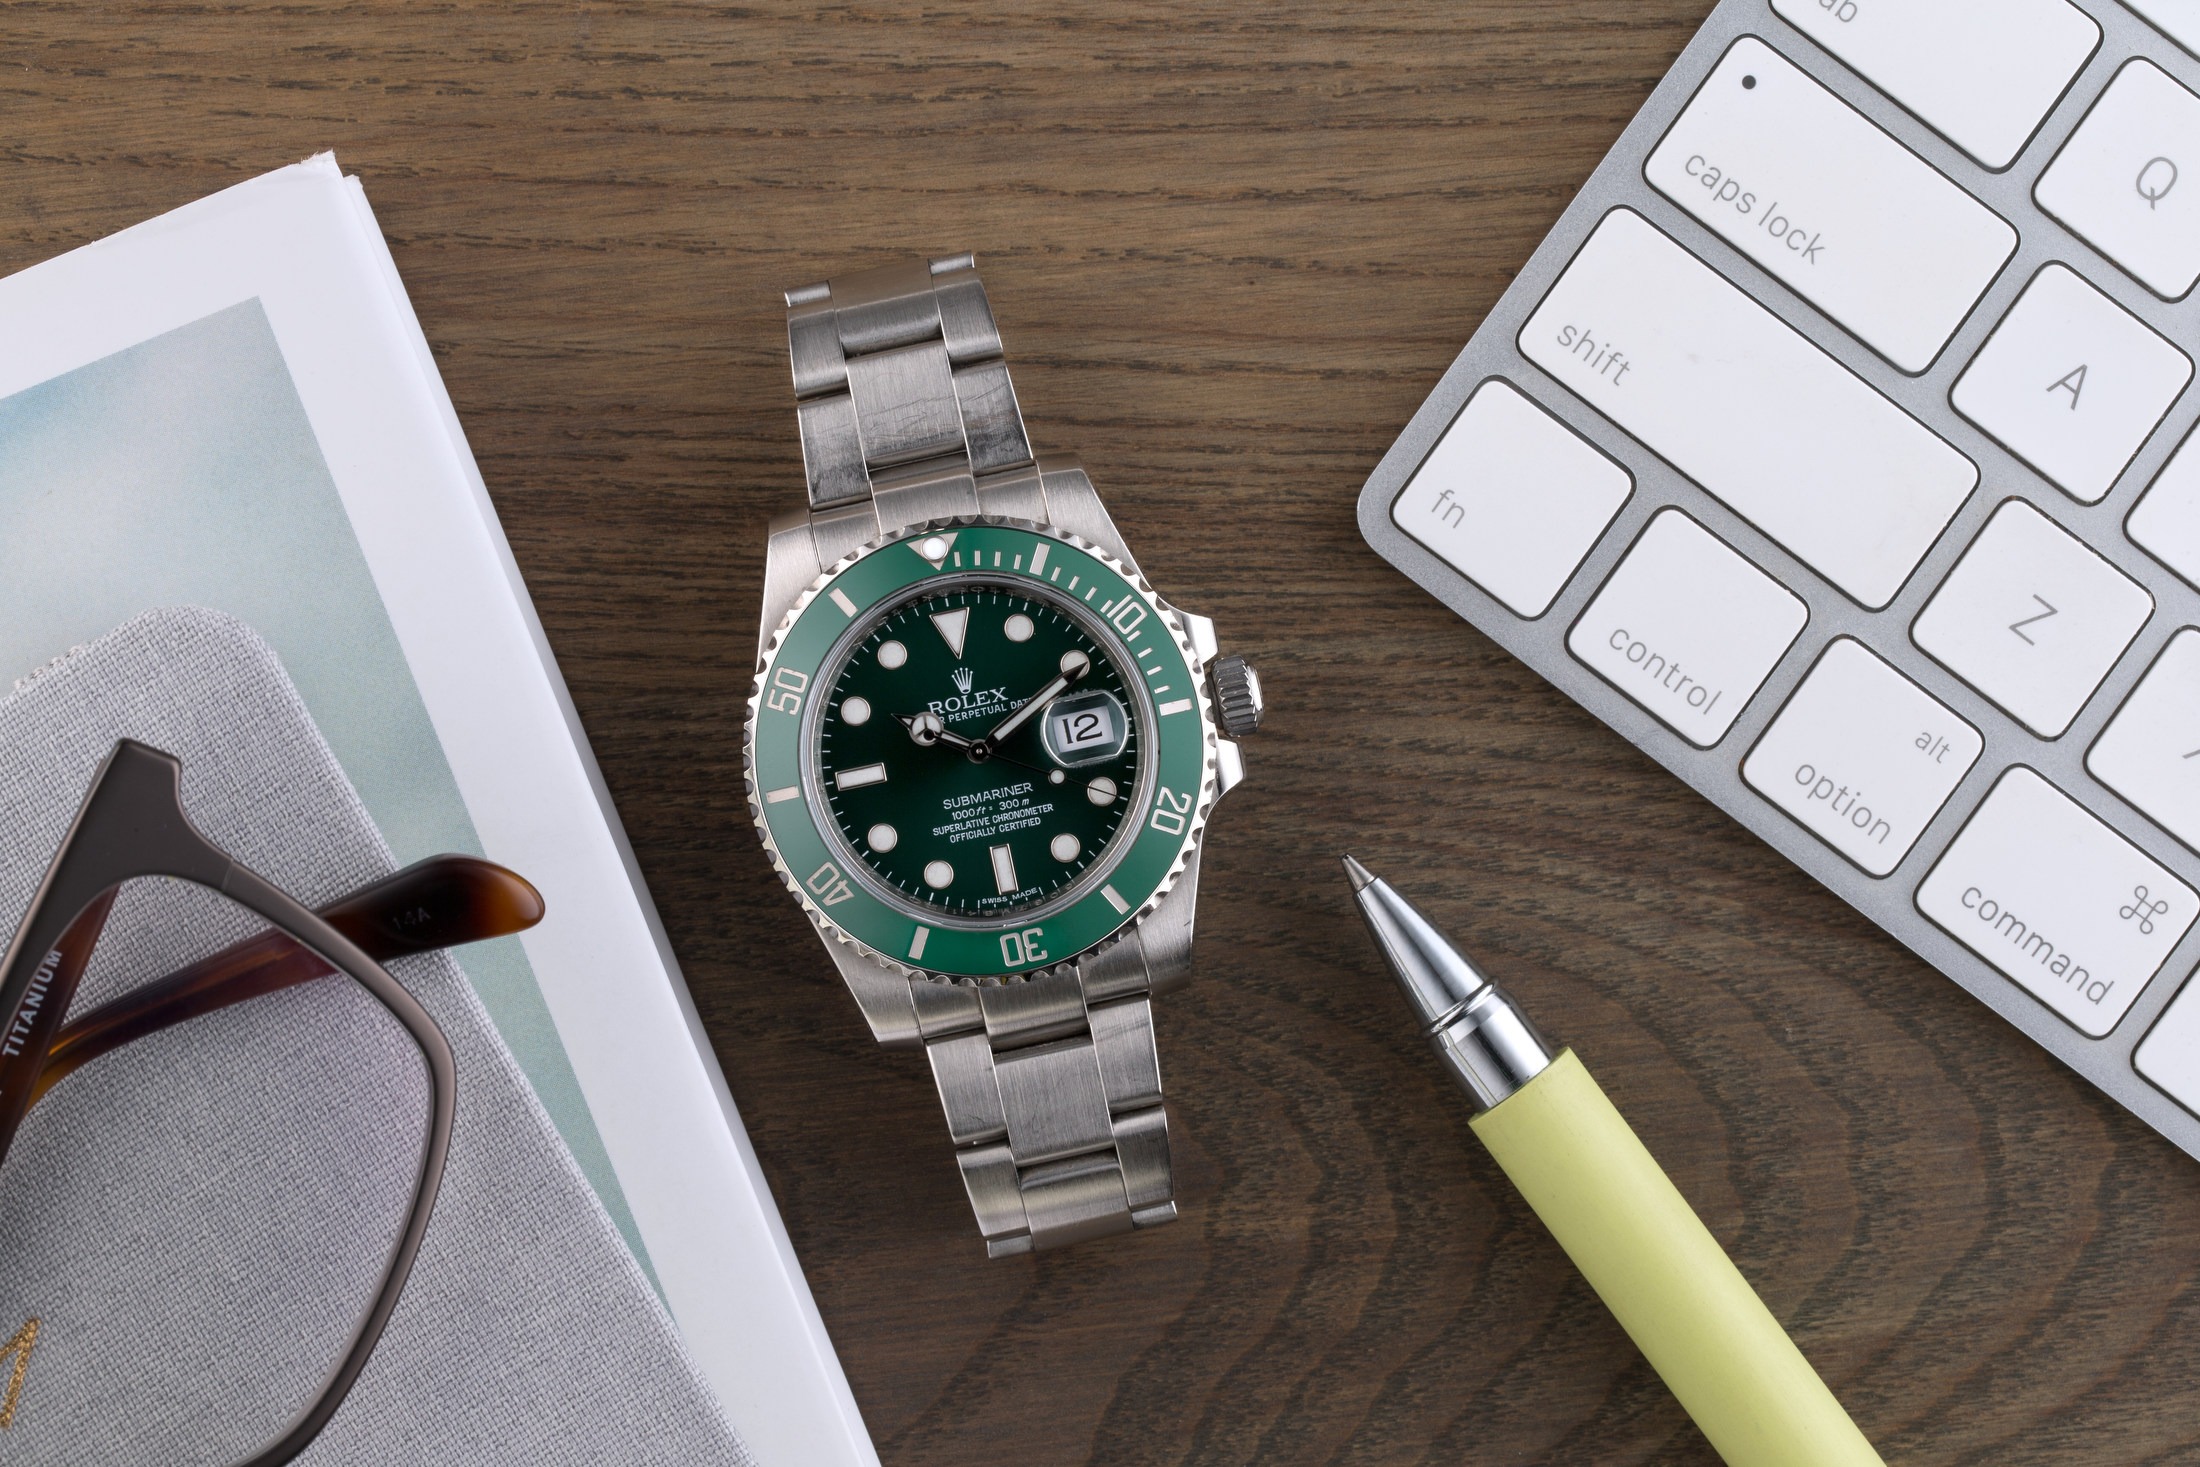 Styled Product Photo of vintage metal Rolex watch. Watch sitting on wood desk with computer and tablet.